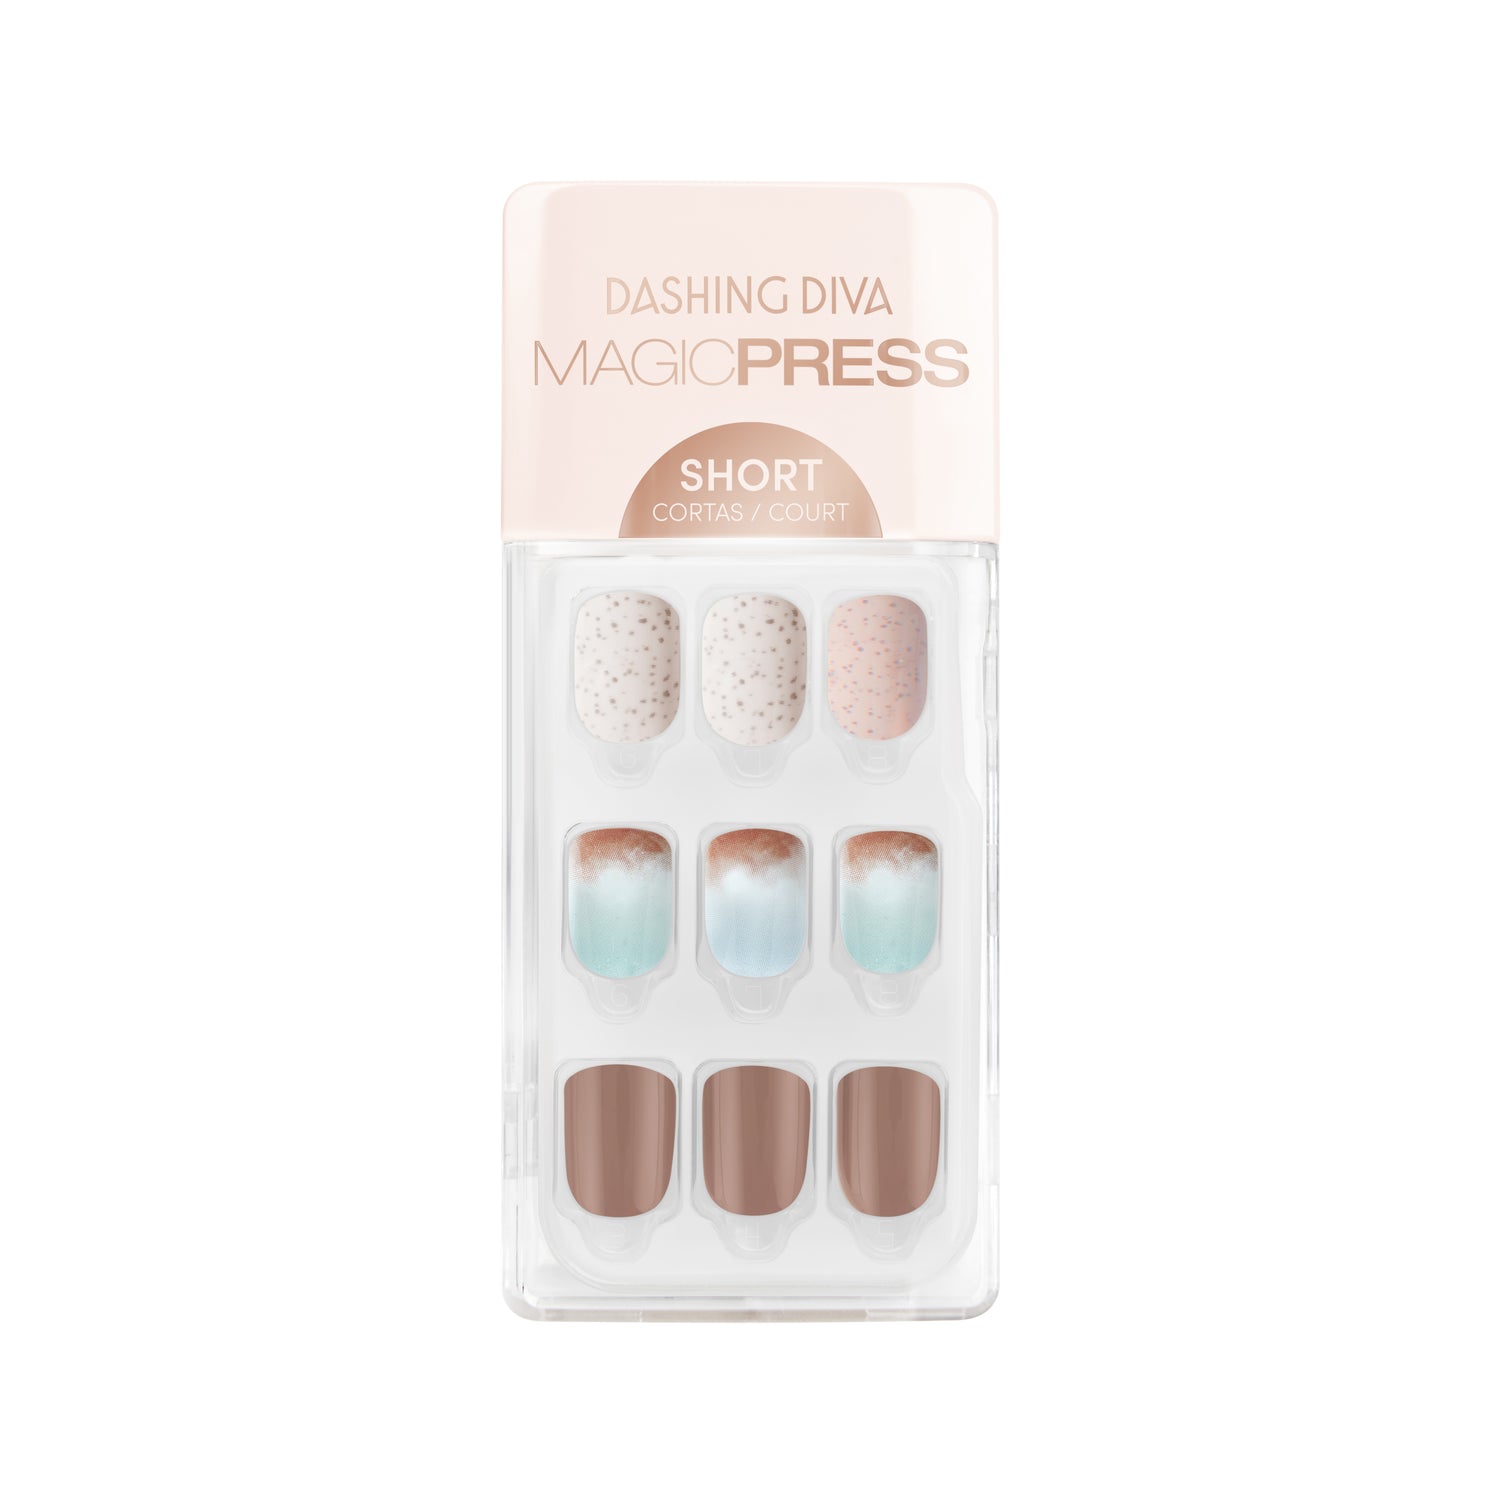 Dashing Diva MAGIC PRESS short, square brown and off-white press on gel nails with speckle and blue gradient accents.